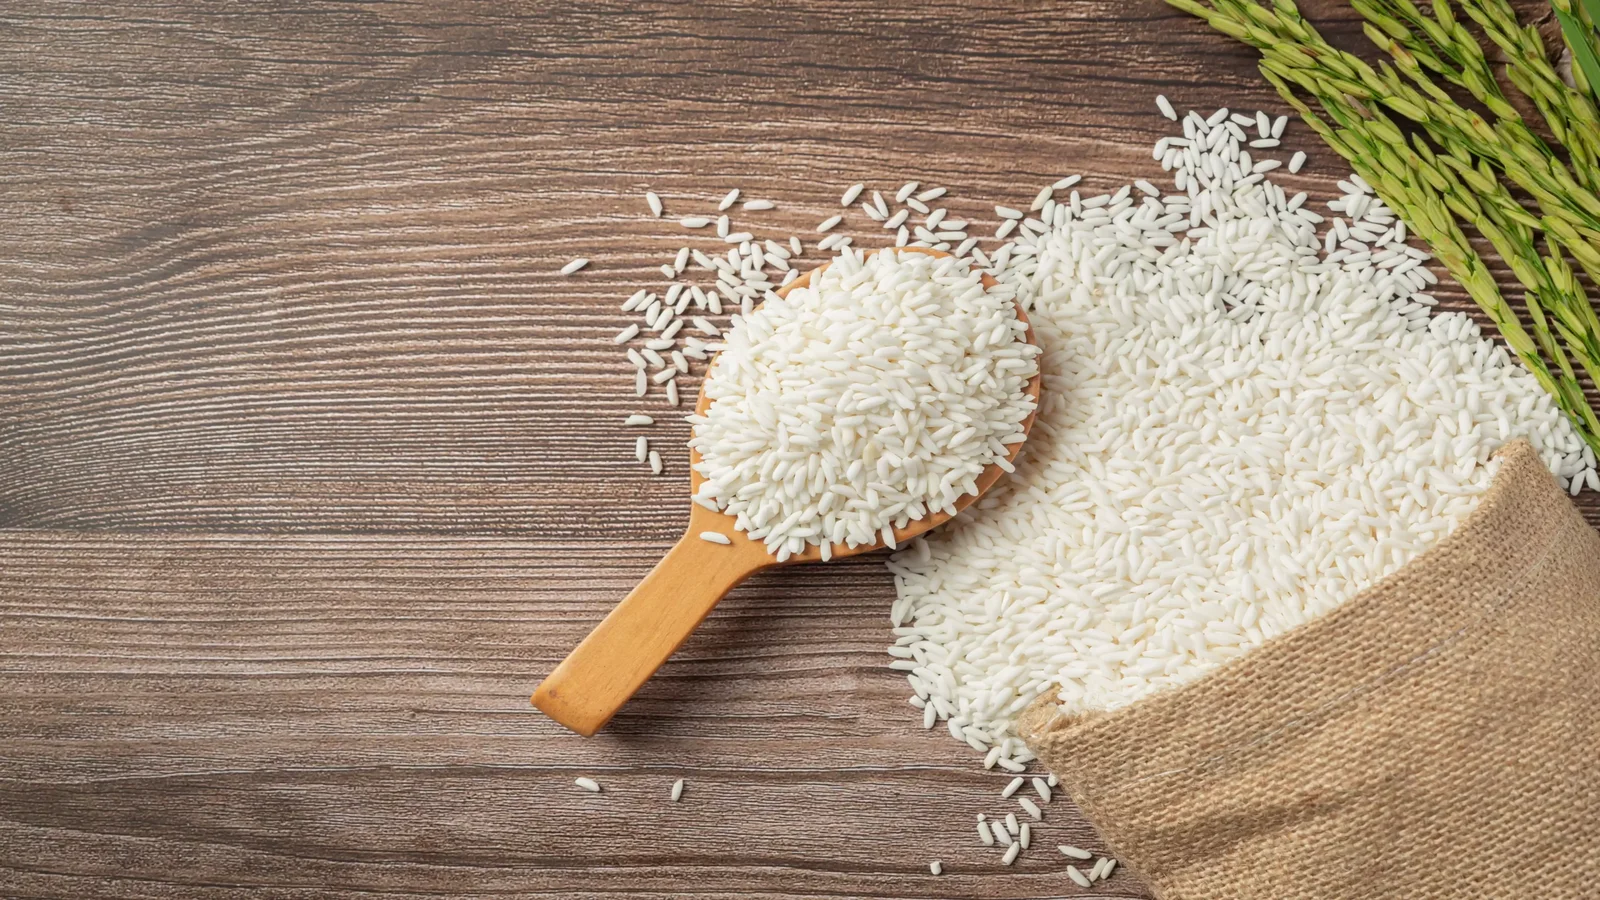 Côte d’Ivoire launches construction of a US$7.1M rice mill in Odienné